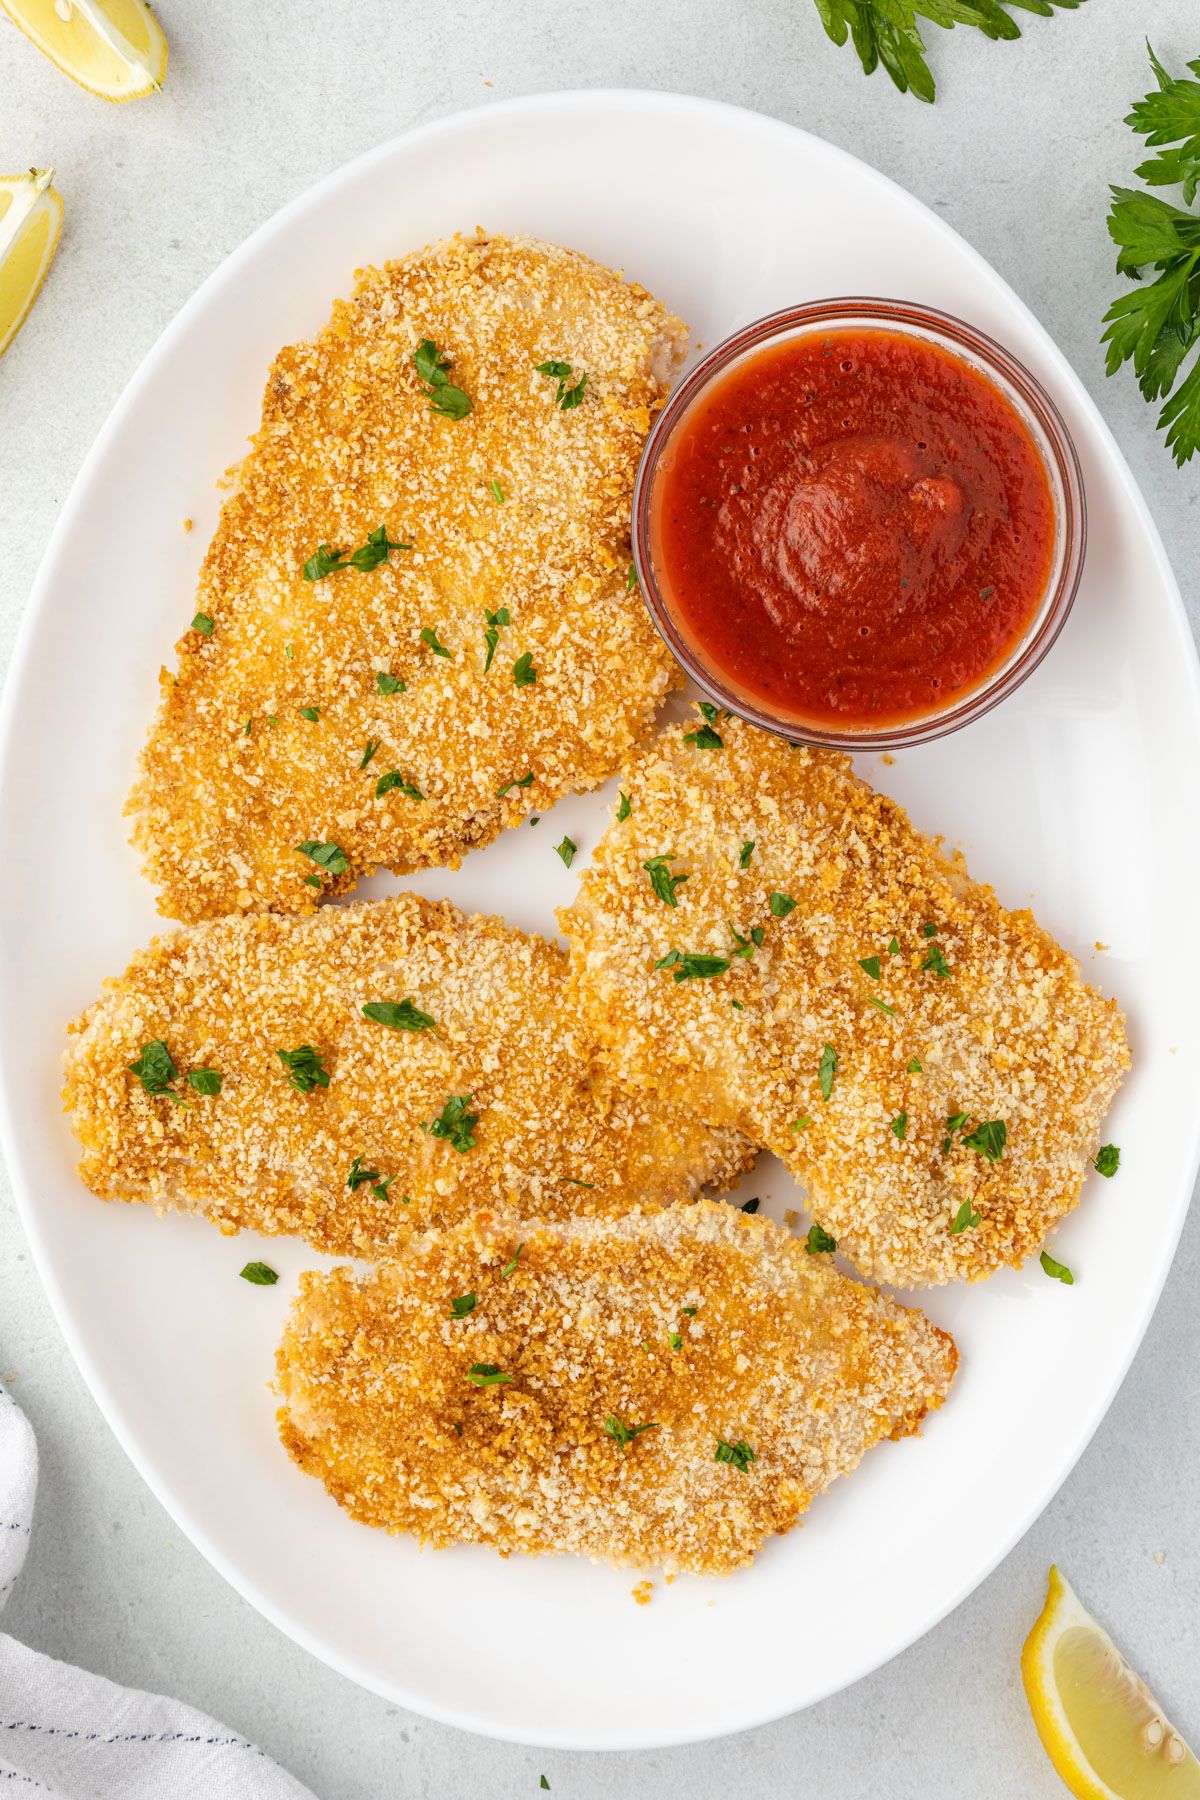 Overhead of 4 pieces of panko breaded chicken on an oval platter with a small bowl of marinara.